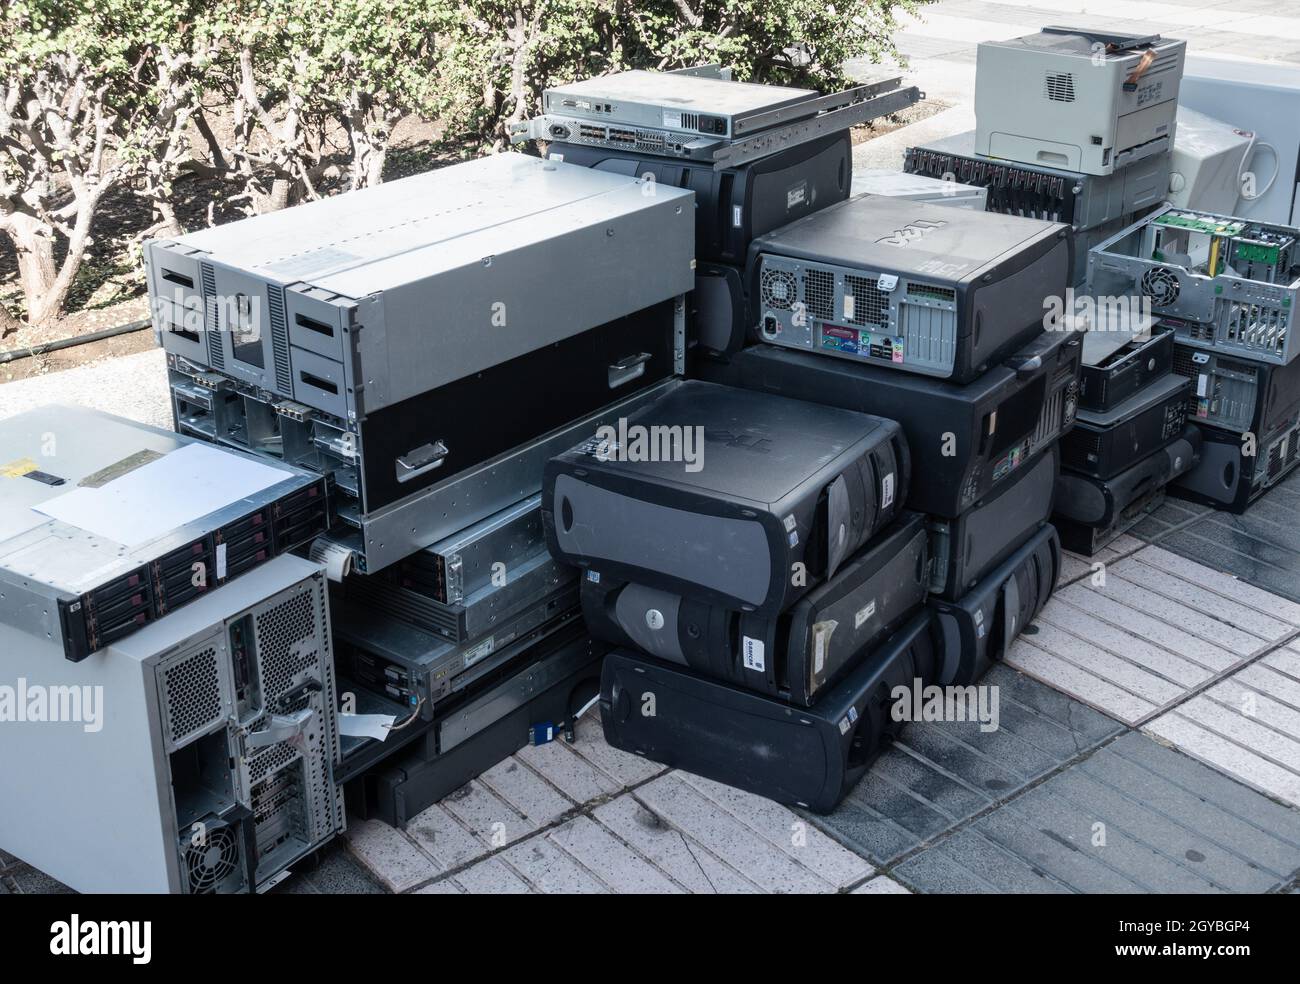 Computers for recycling in street outside offices. Stock Photo